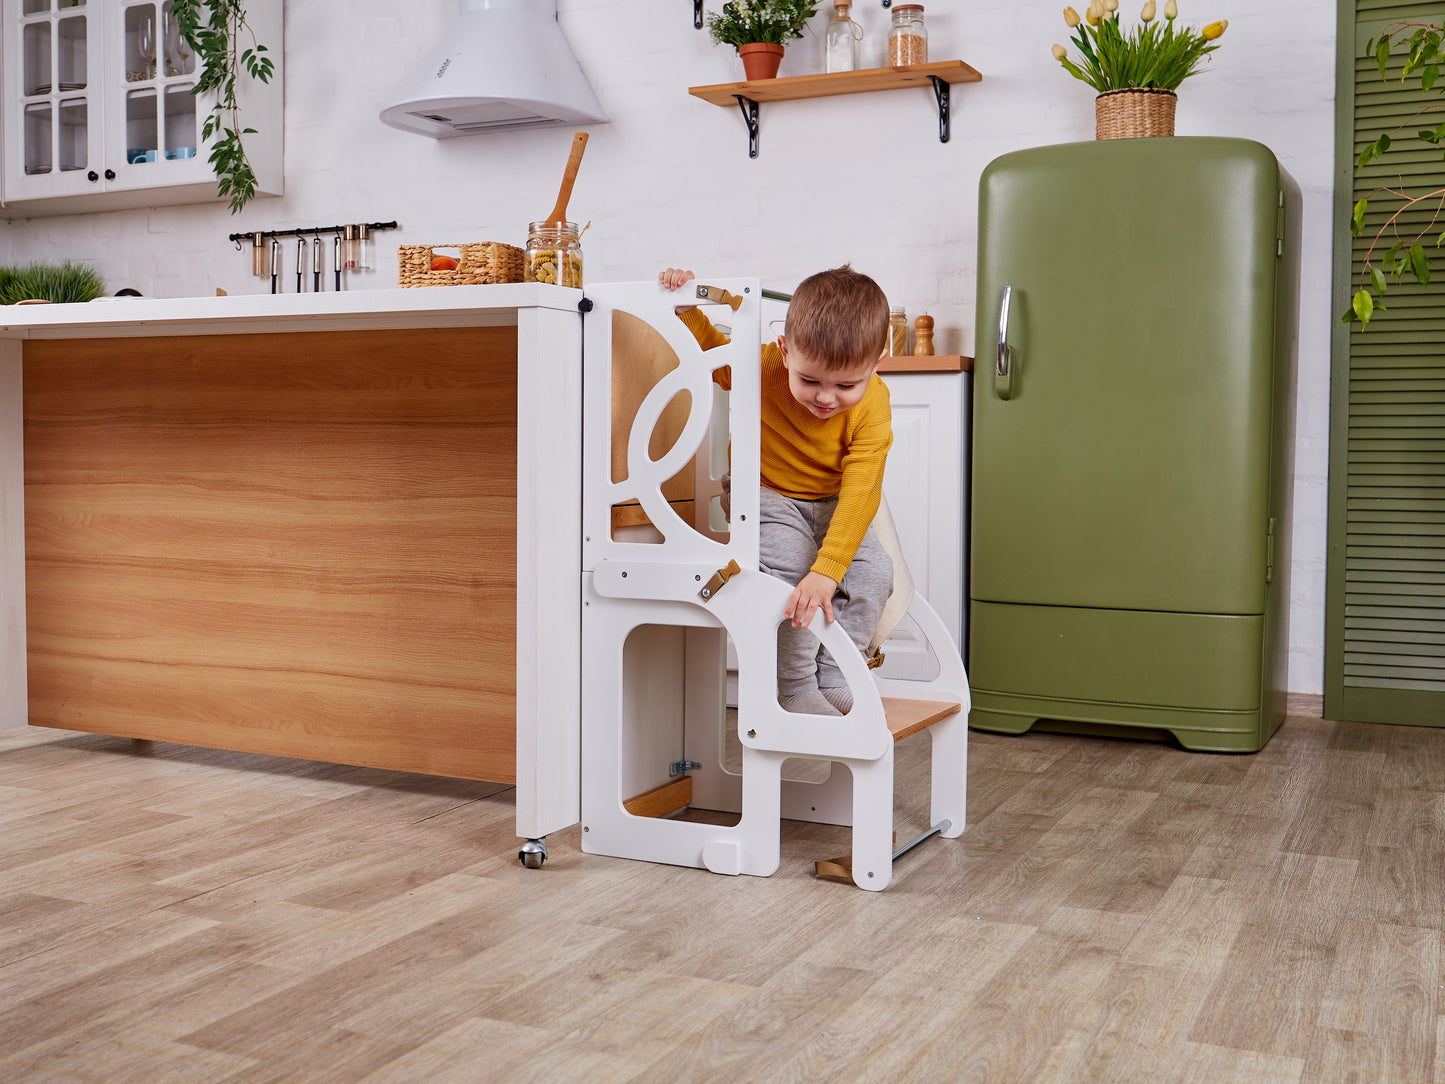 Natural Convertible learning toddler tower & table WITH BACK and slide, toddler kitchen helper stool